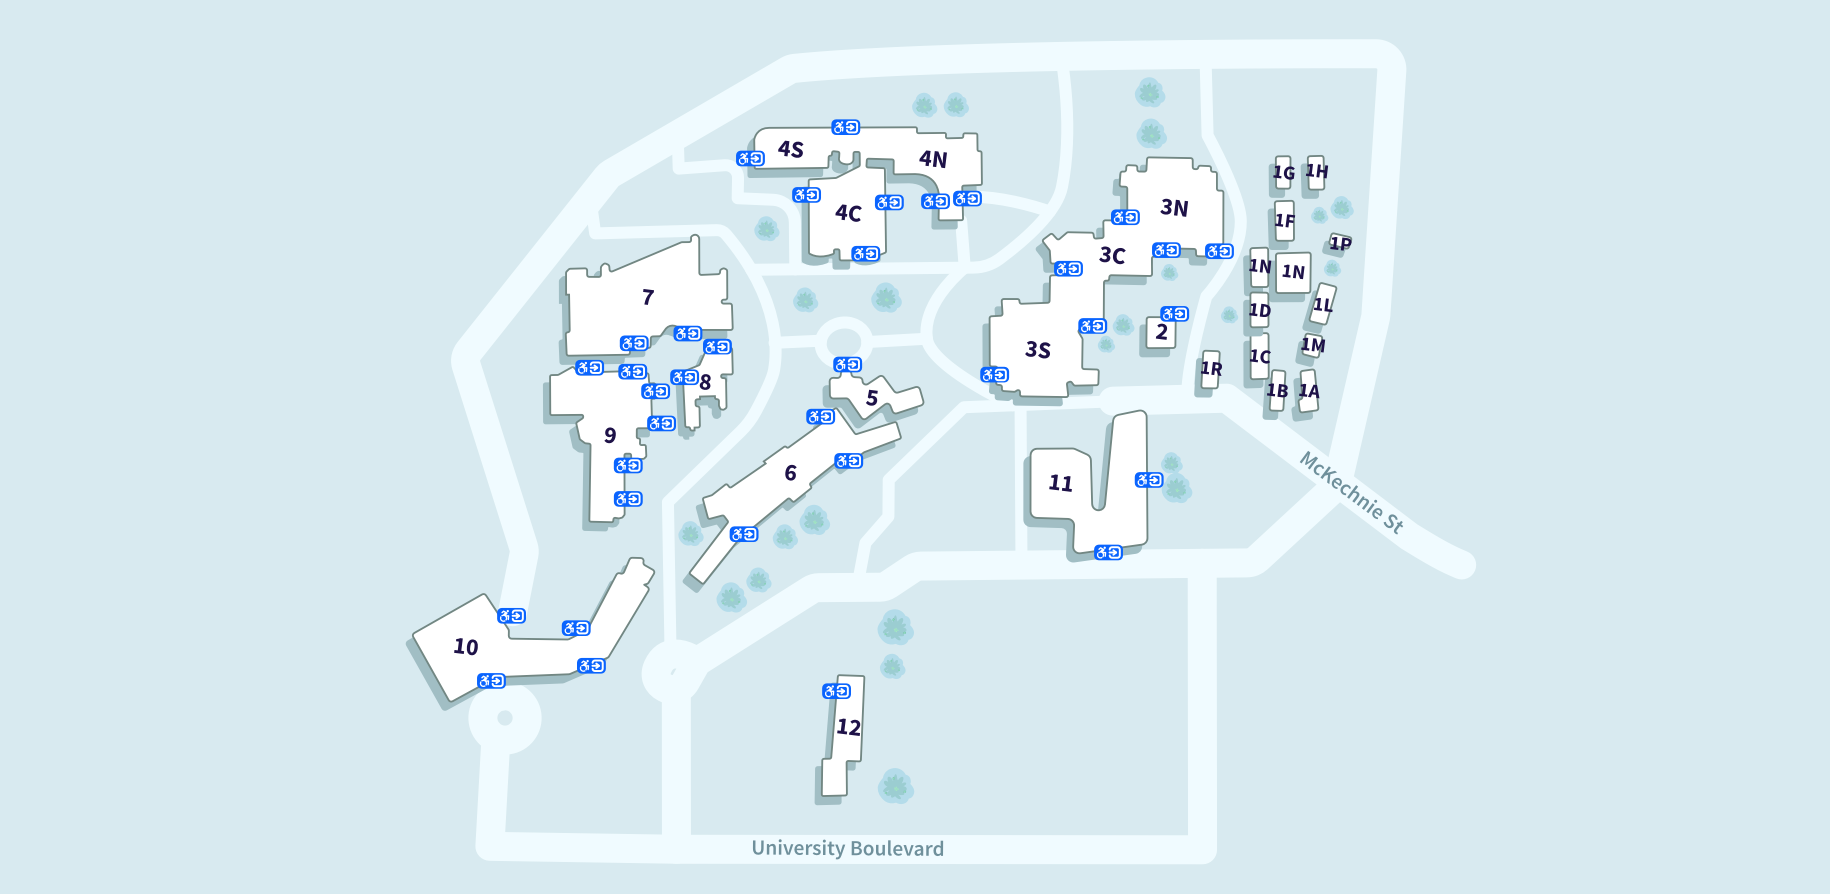 VU St Albans Campus map showing the buildings and their accessible entrances, from lowest number to highest: 1A, 1B, 1C, 1D, 1F, 1G, 1H, 1L, 1M, 1R, 1P, 2, 3S, 3C, 3N, 4S, 4C, 4N, 5, 6, 7, 8, 9, 10, 11. Building 1 has no accessible entrances shown.